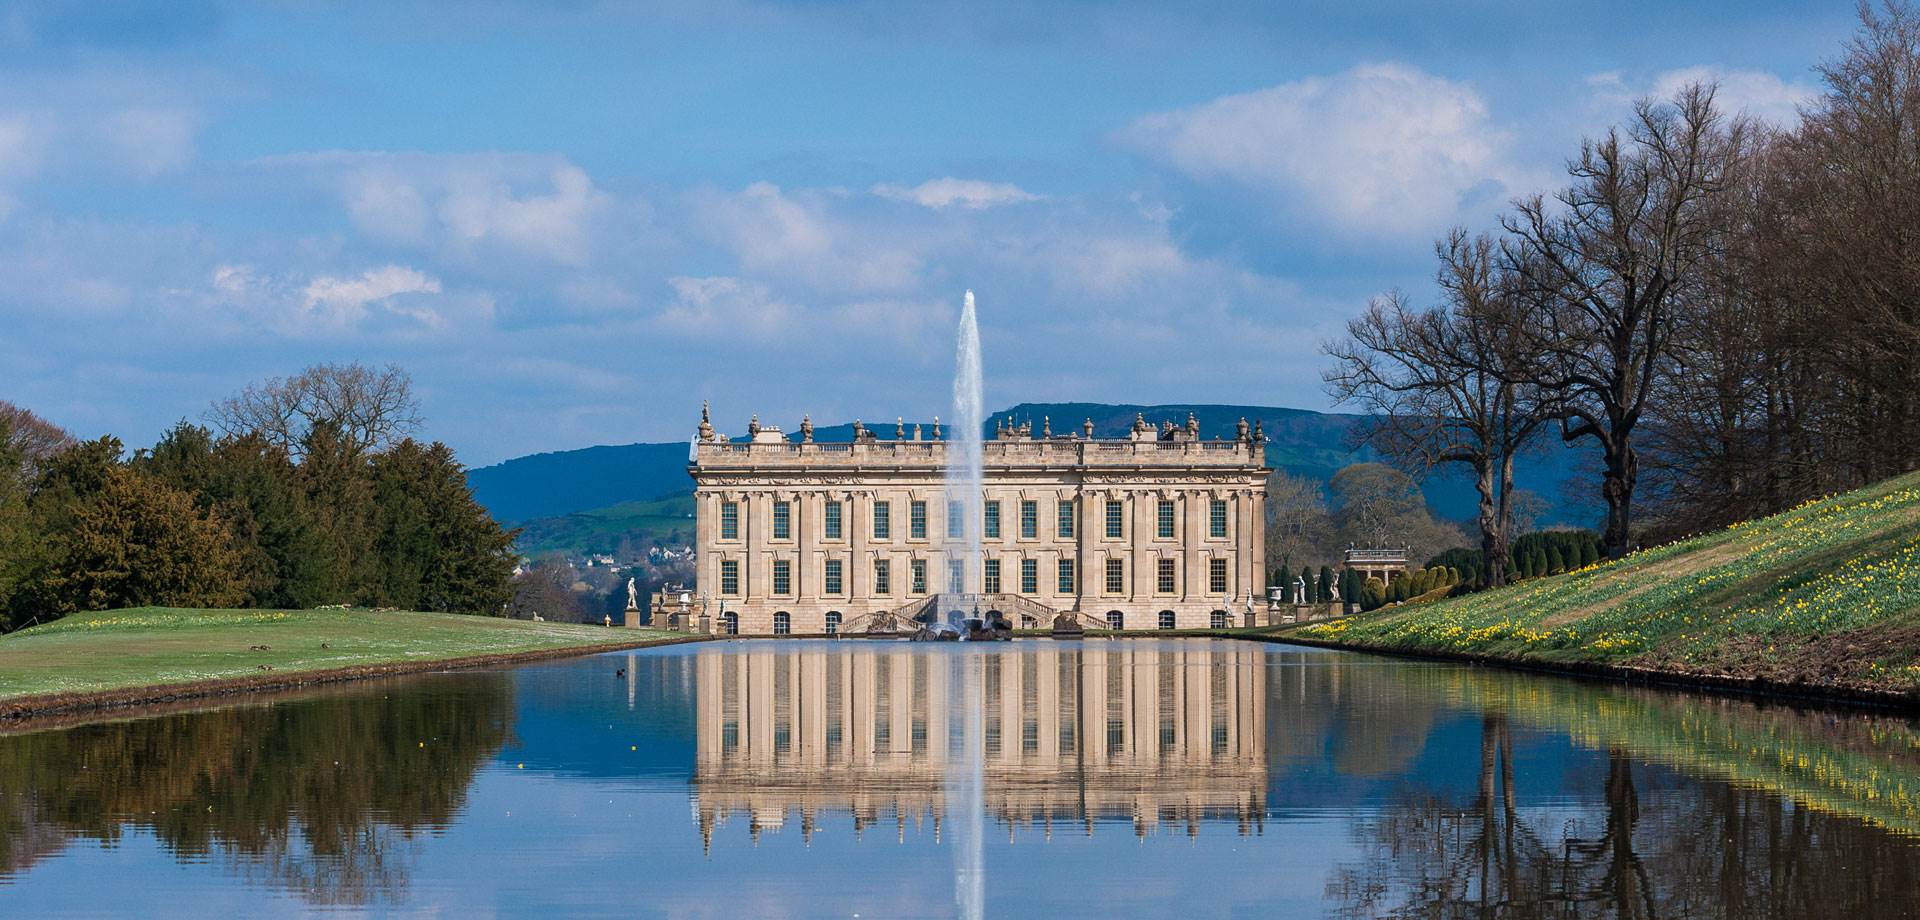 tours to chatsworth house from london